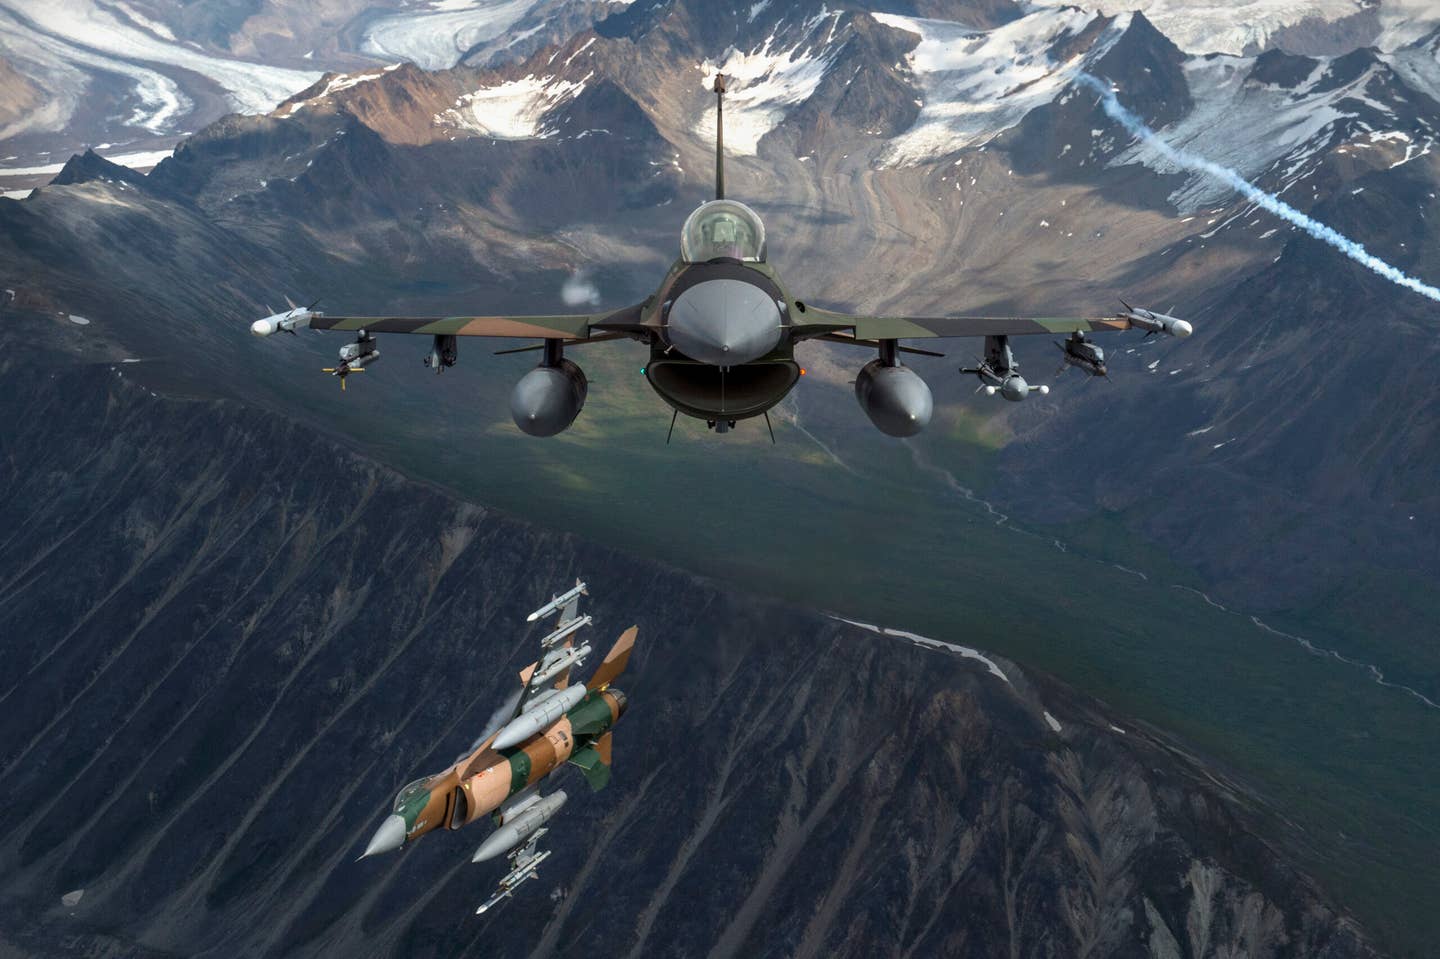 U.S. Air Force F-16 Fighting Falcons from Eielson Air Force Base fly in formation over the Joint Pacific Alaska Range Complex, July 18, 2019. The JPARC is a 67,000 plus square mile area, providing a realistic training environment commanders leverage for full spectrum engagements, ranging from individual skills to complex, large-scale joint engagements. (U.S. Air Force photo by Staff Sgt. James Richardson)